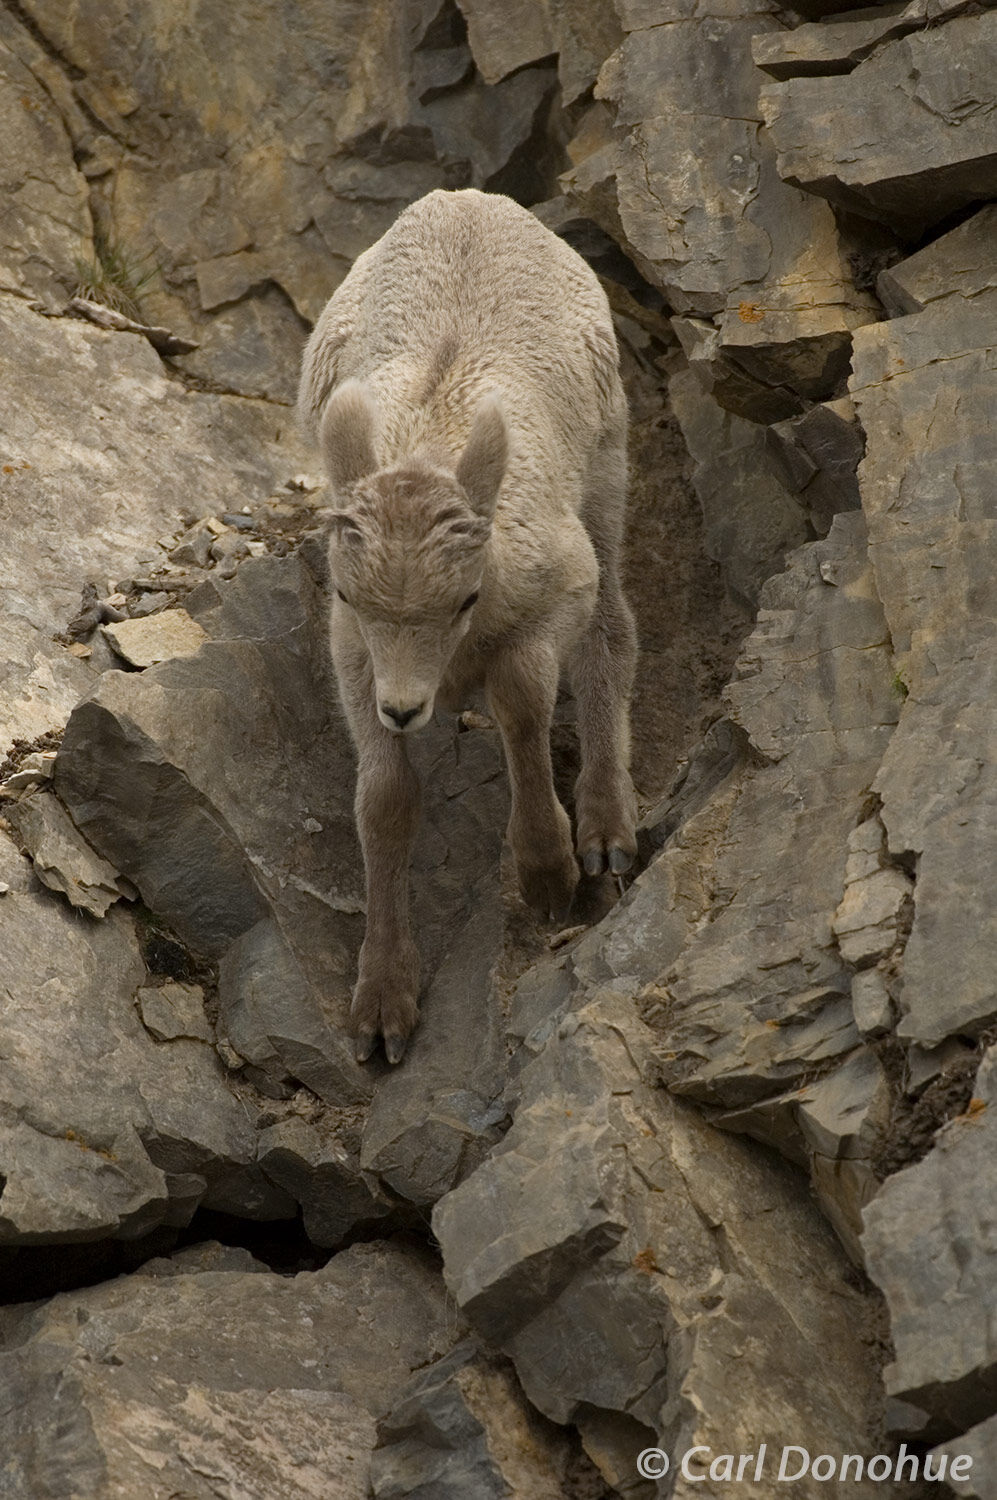 Descending some steep cliffs and rocks is a talent the bighorn sheep have boatloads of. Pretty amazing to watch how easily they...